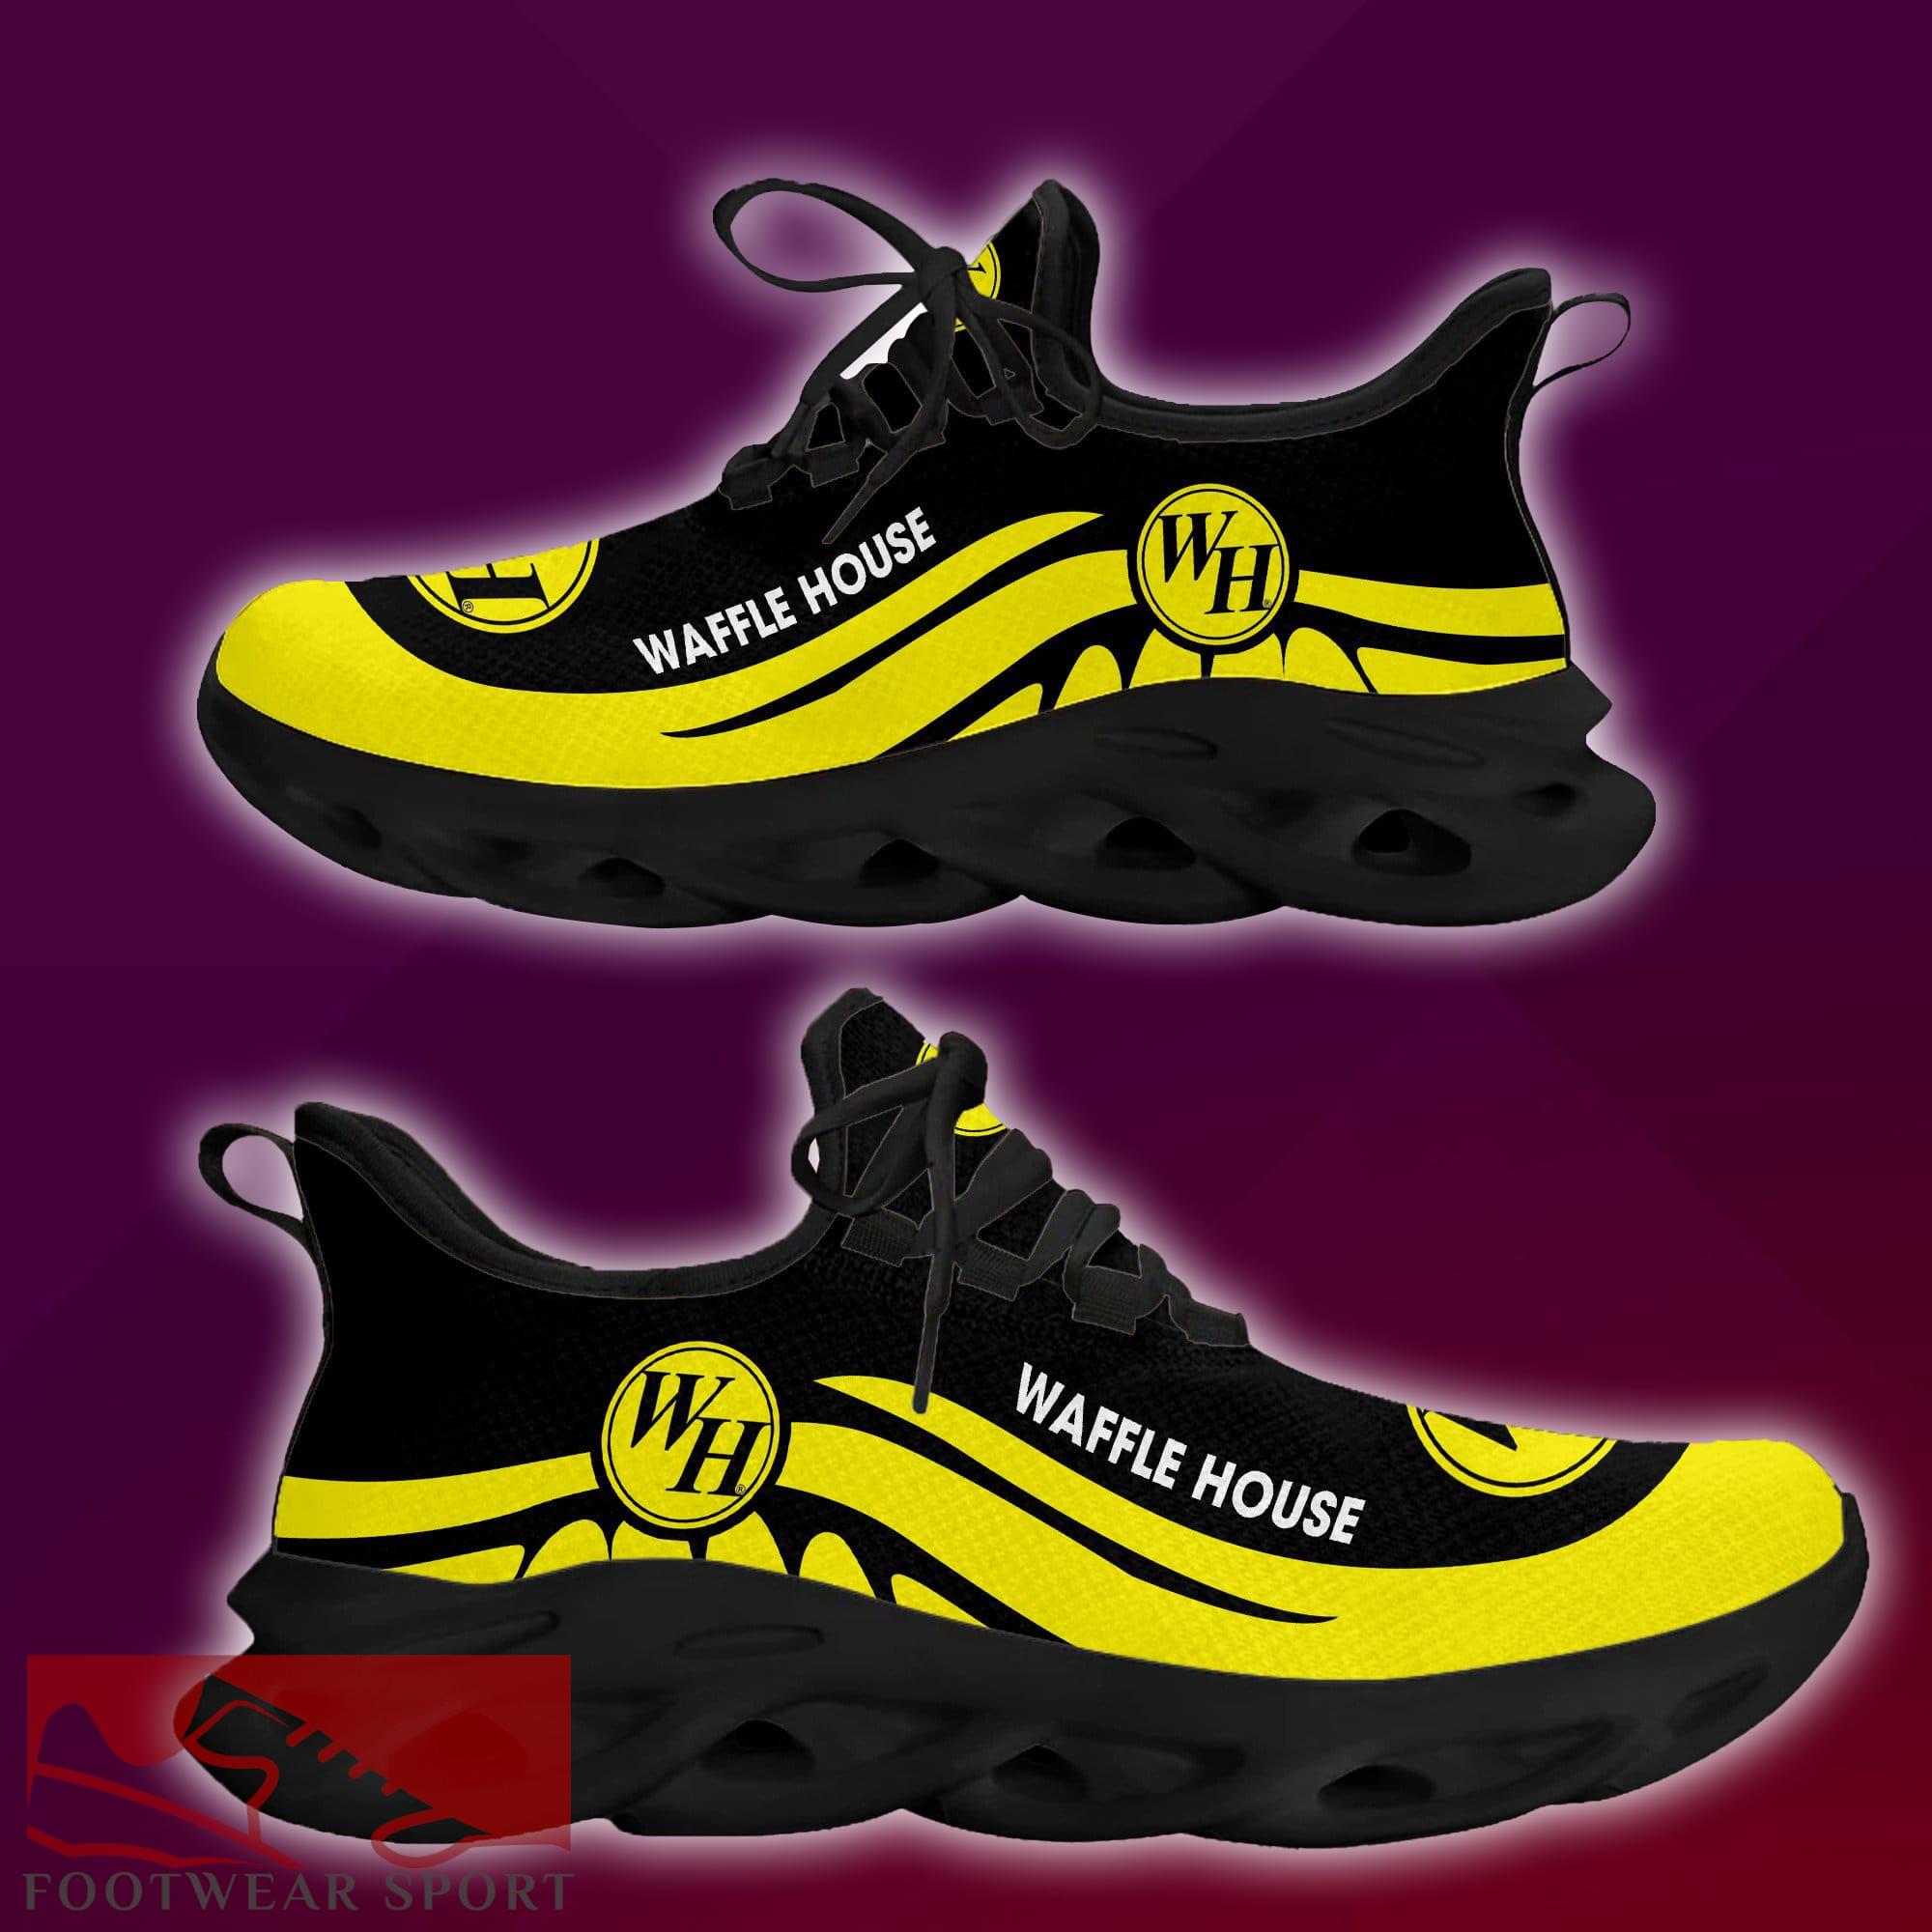 waffle house Brand New Logo Max Soul Sneakers Fashion-forward Running Shoes Gift - waffle house New Brand Chunky Shoes Style Max Soul Sneakers Photo 1